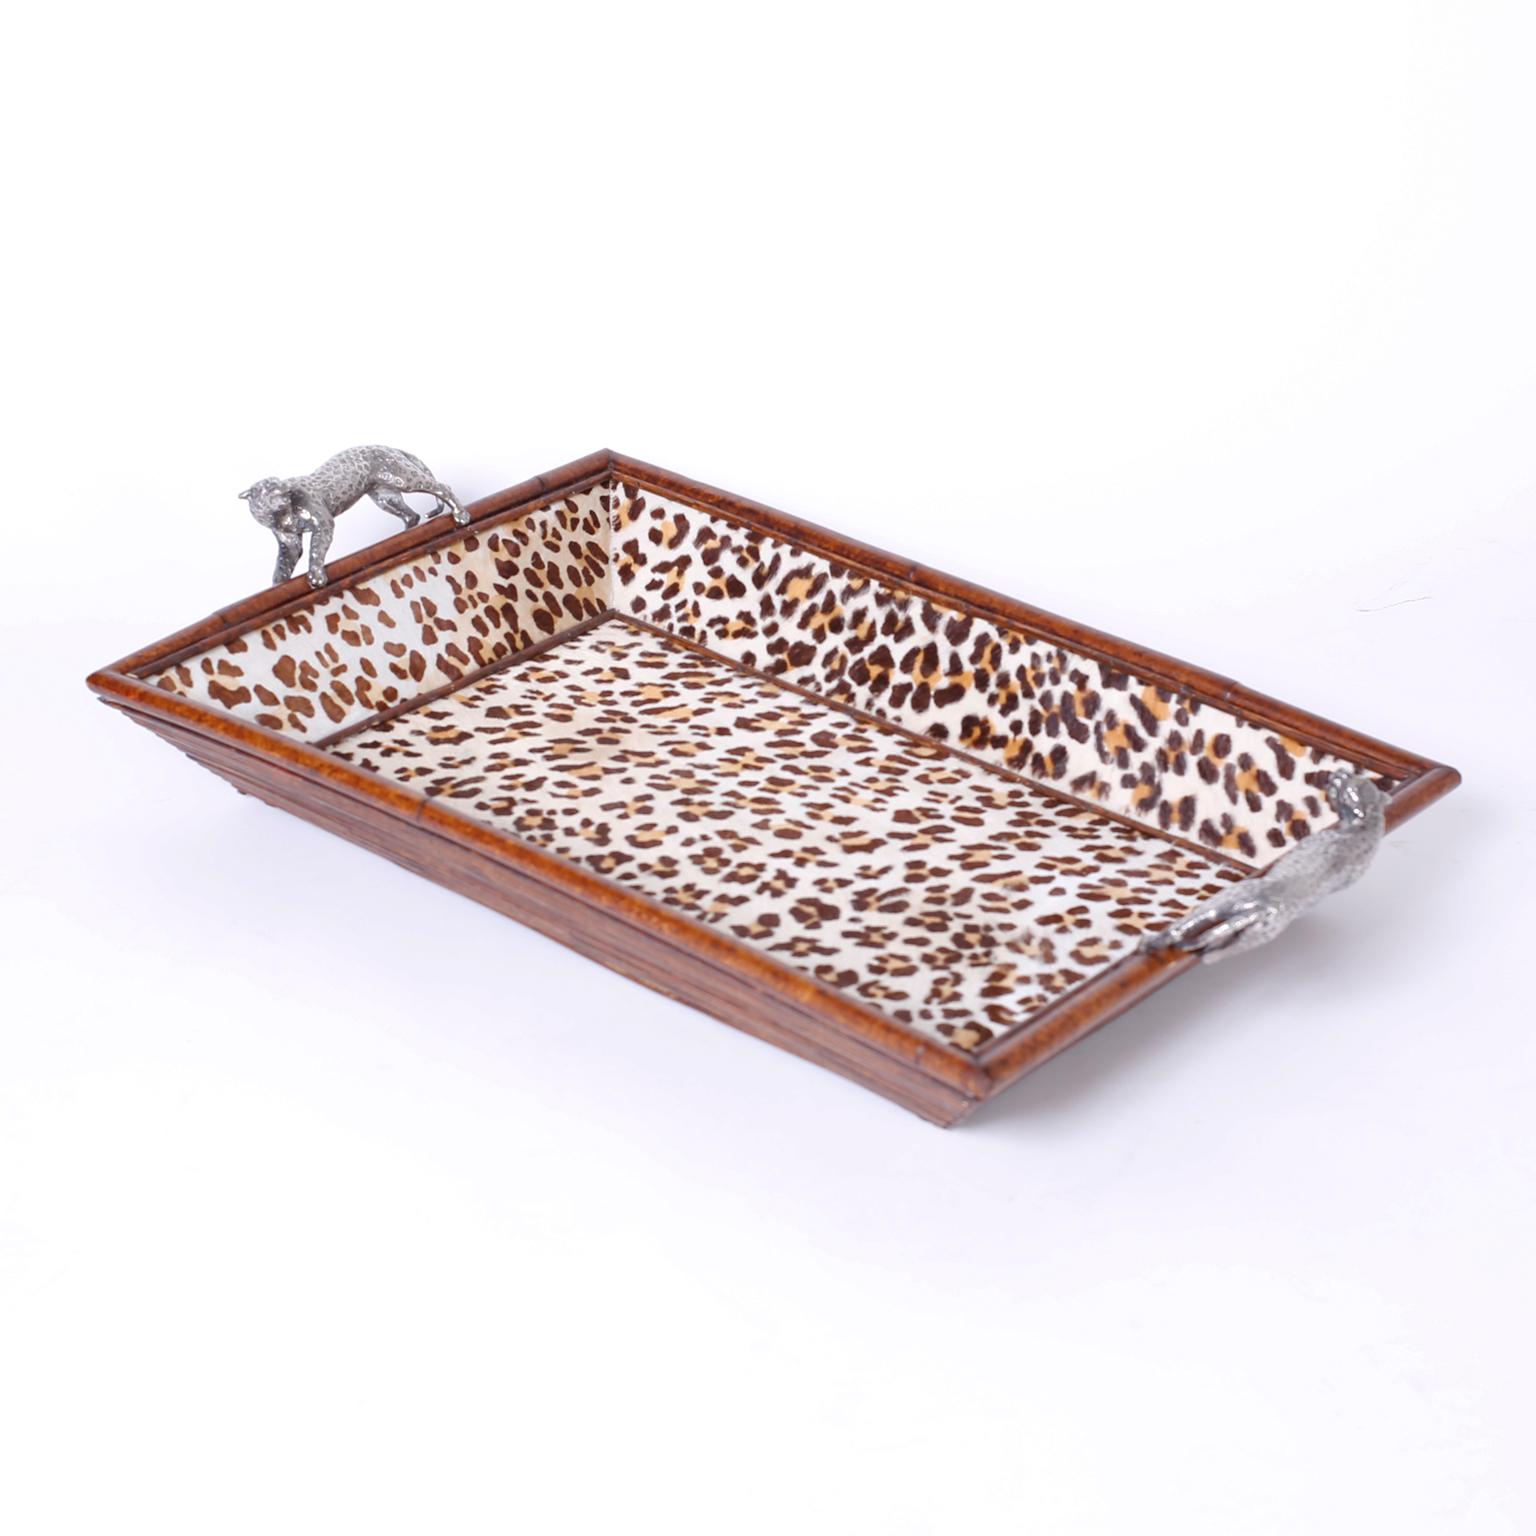 Midcentury rattan tray with silvered metal leopard handles and an interior lined with leopard printed cowhide. Signed Maitland -Smith on the bottom.